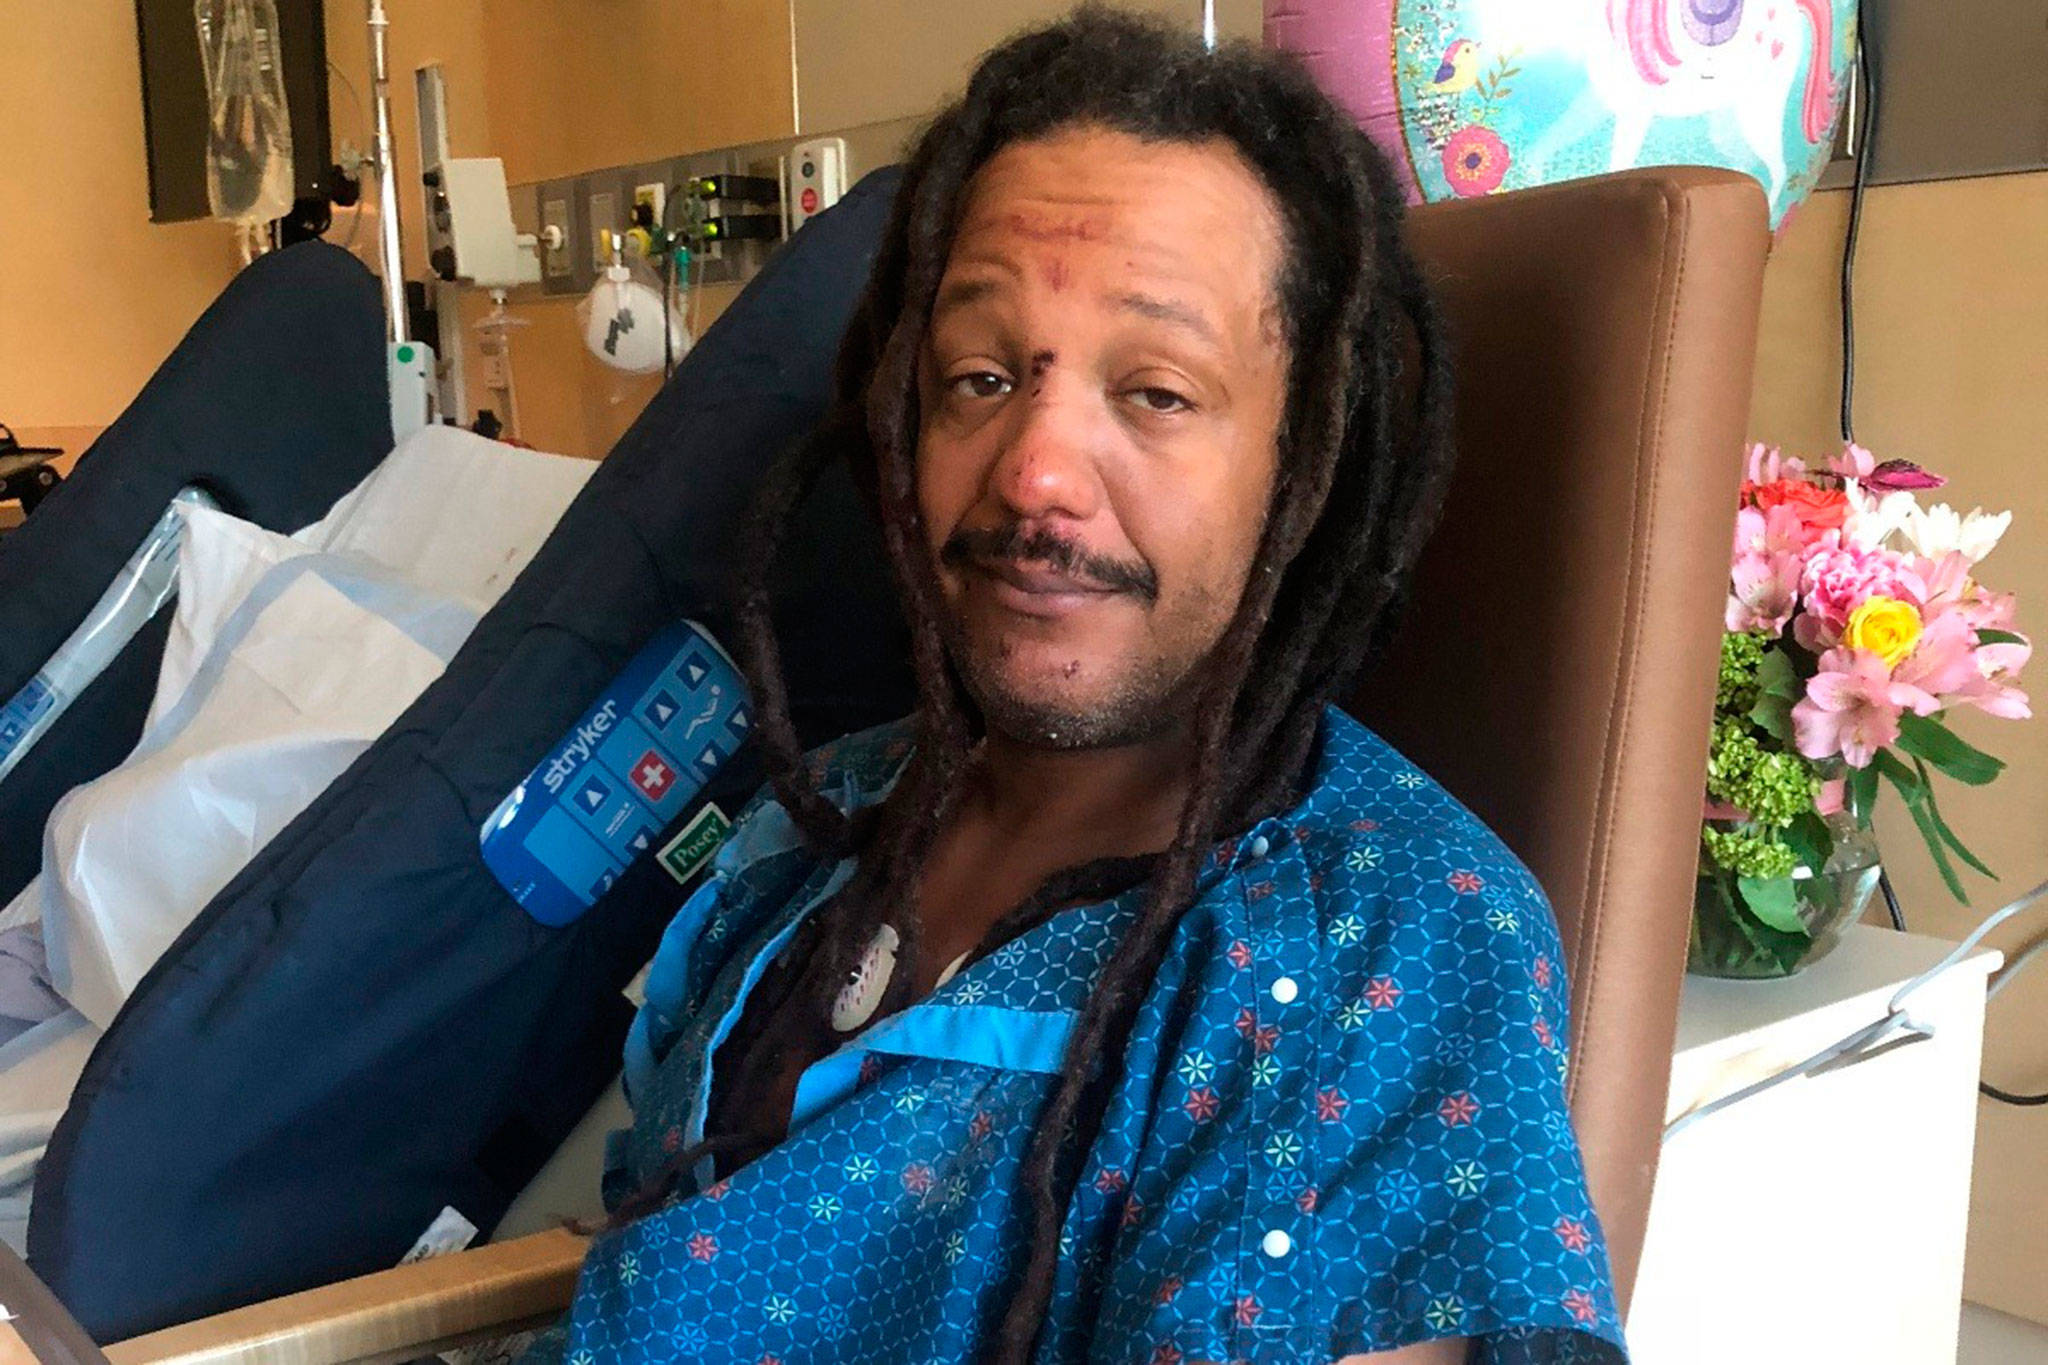 Joe Allen, Jr., of Port Angeles continues to recuperate in Wenatchee after he was struck in the back of the head with a rock at a Phish concert in the Gorge Amphitheater on July 21. Submitted photo